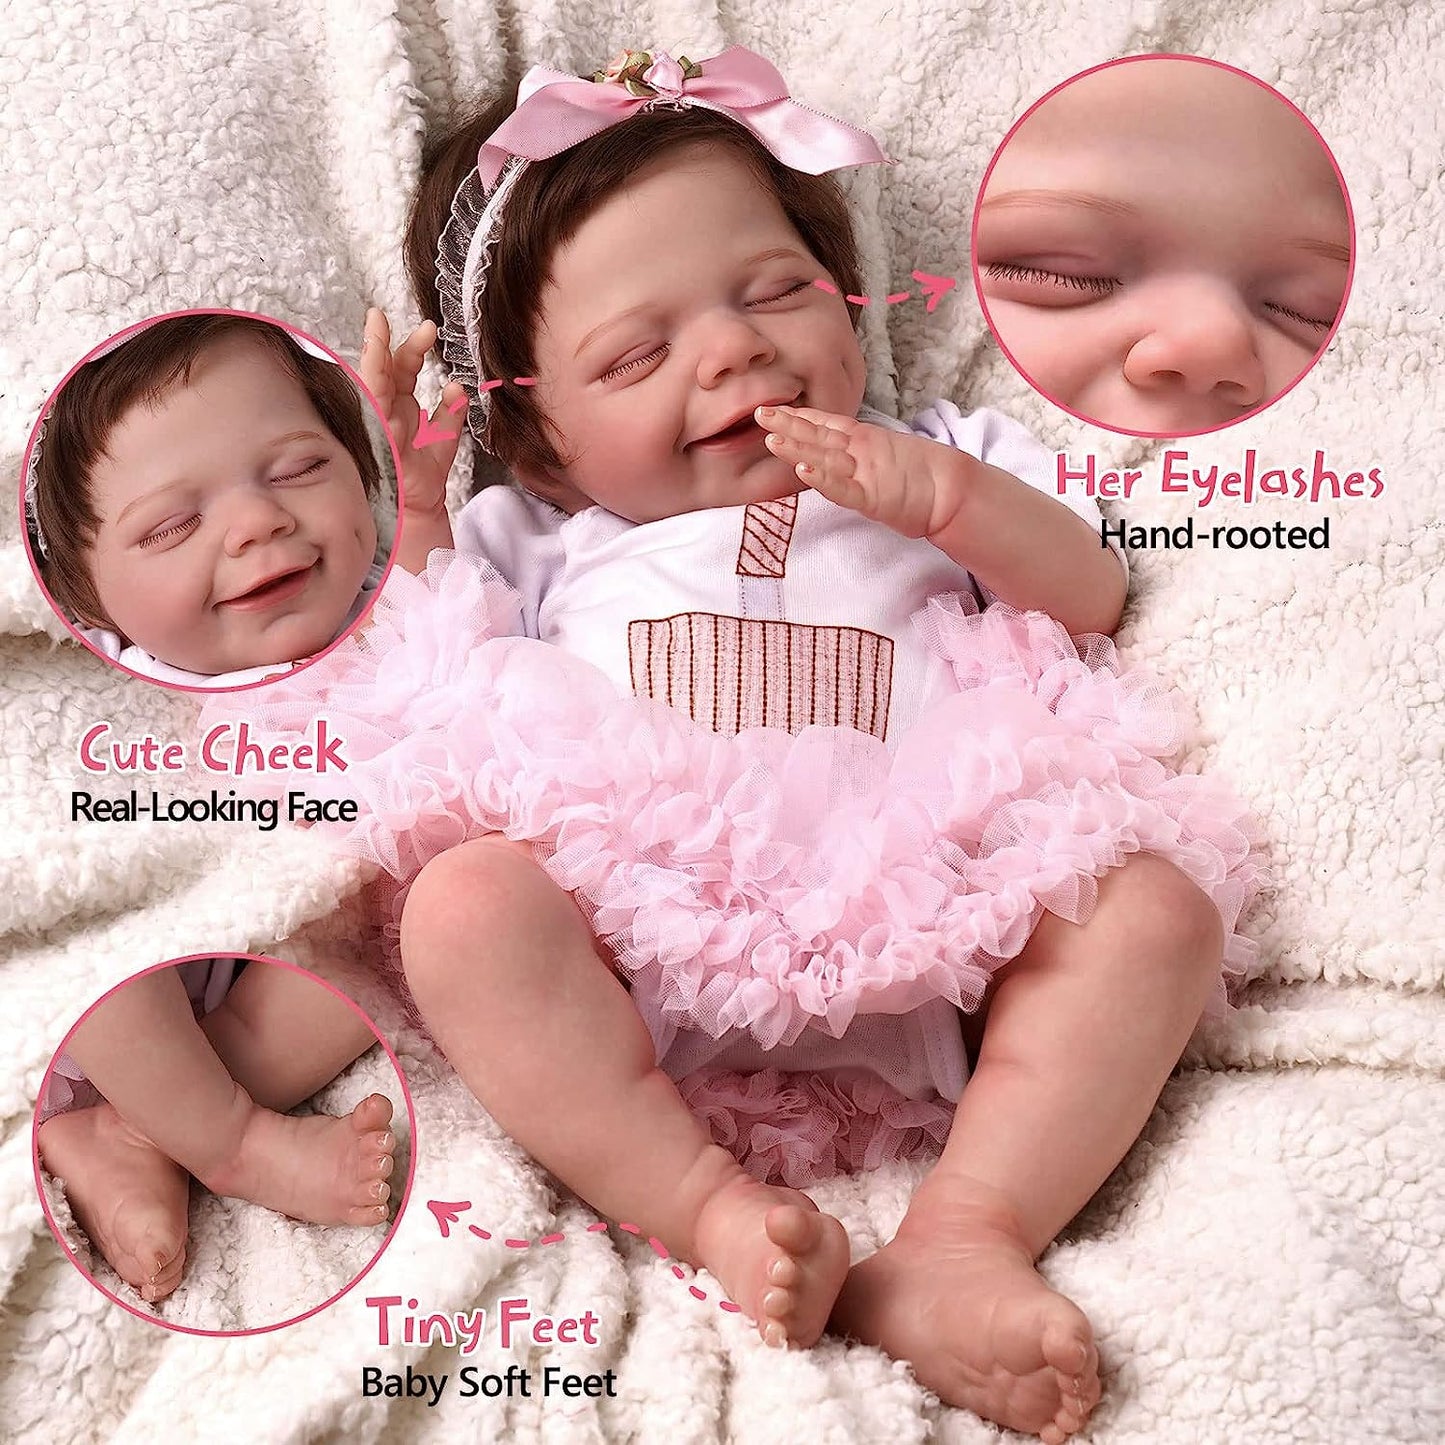 Full Body Silicone Smiling Reborn Doll 22 Inches - Mary